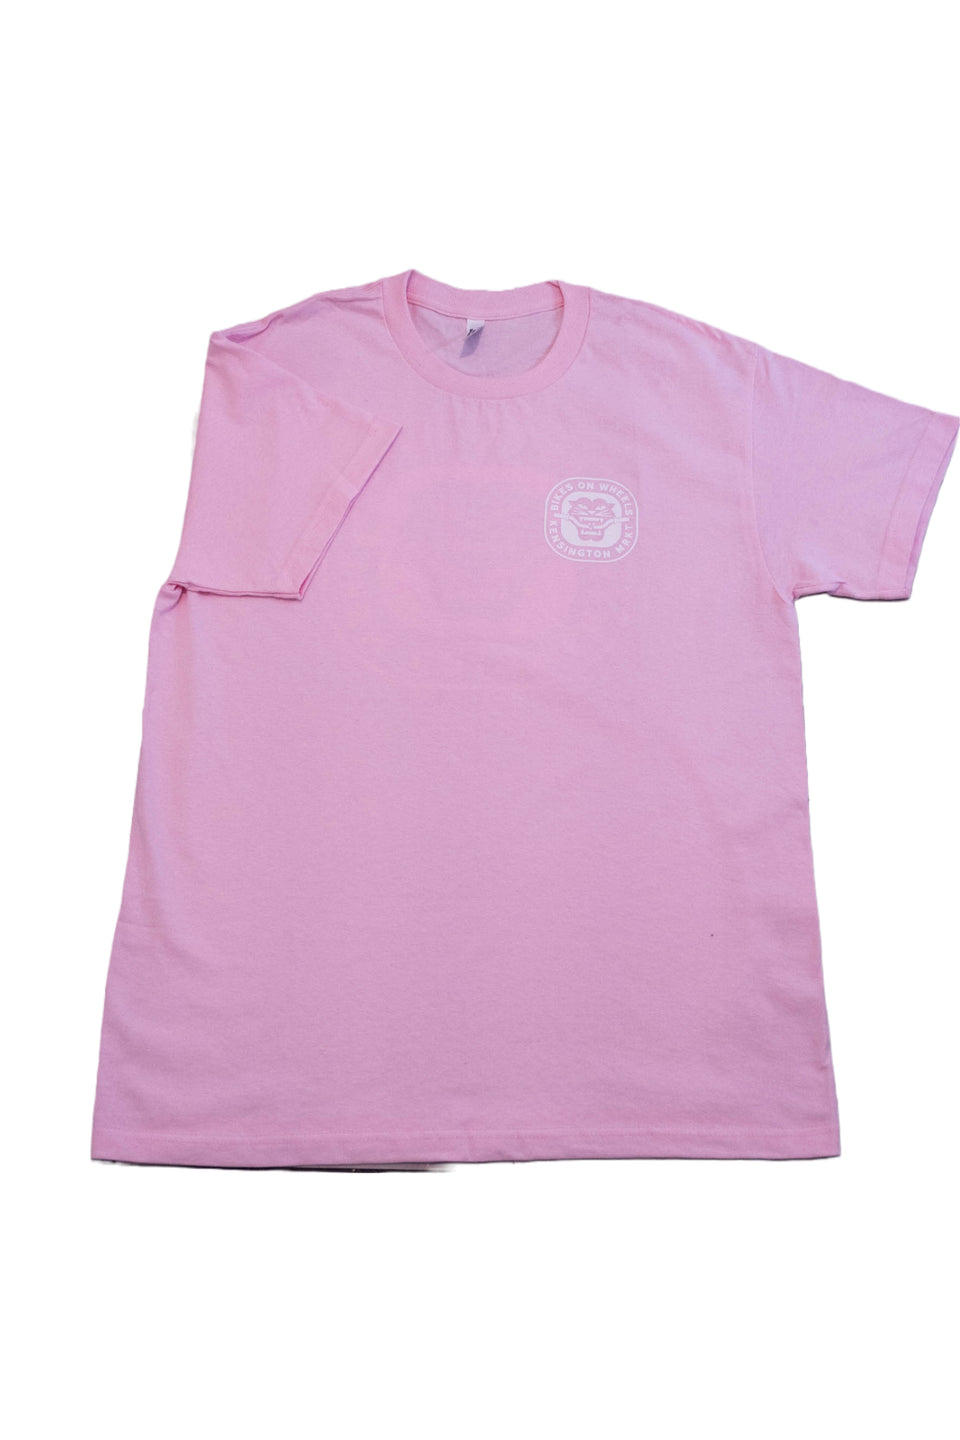 Limited Pink Panther T-shirt